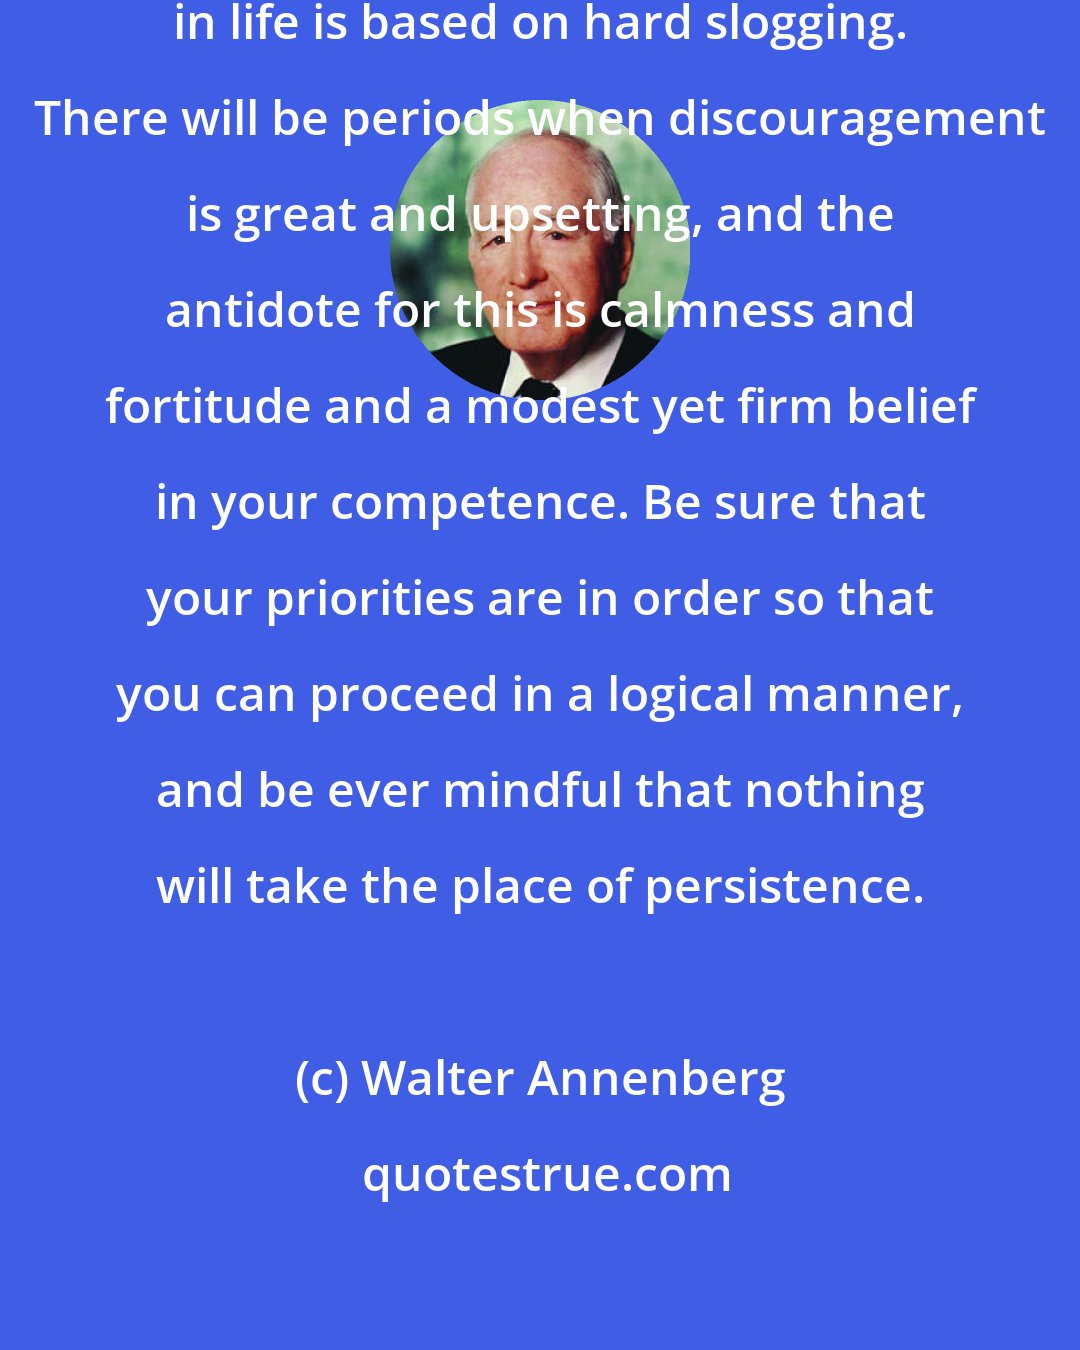 Walter Annenberg: I want to remind you that success in life is based on hard slogging. There will be periods when discouragement is great and upsetting, and the antidote for this is calmness and fortitude and a modest yet firm belief in your competence. Be sure that your priorities are in order so that you can proceed in a logical manner, and be ever mindful that nothing will take the place of persistence.